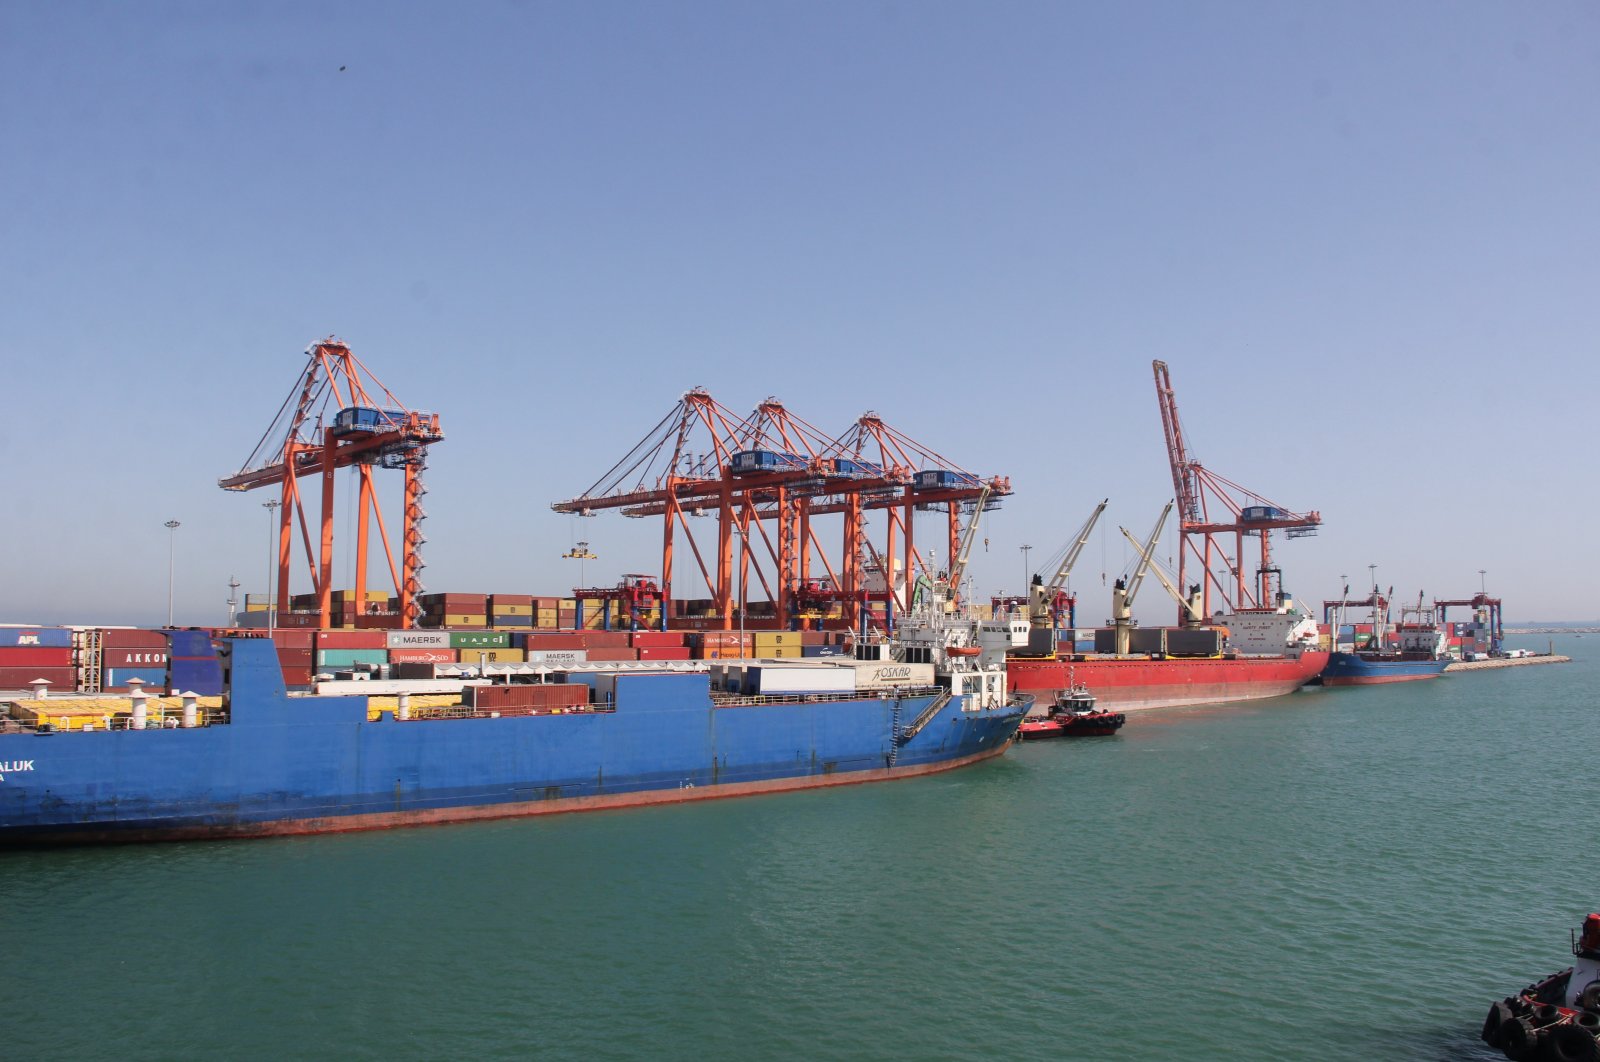 Containers are seen at the Mersin International Port in the southern province of Mersin, Turkey, April 26, 2022. (IHA Photo)